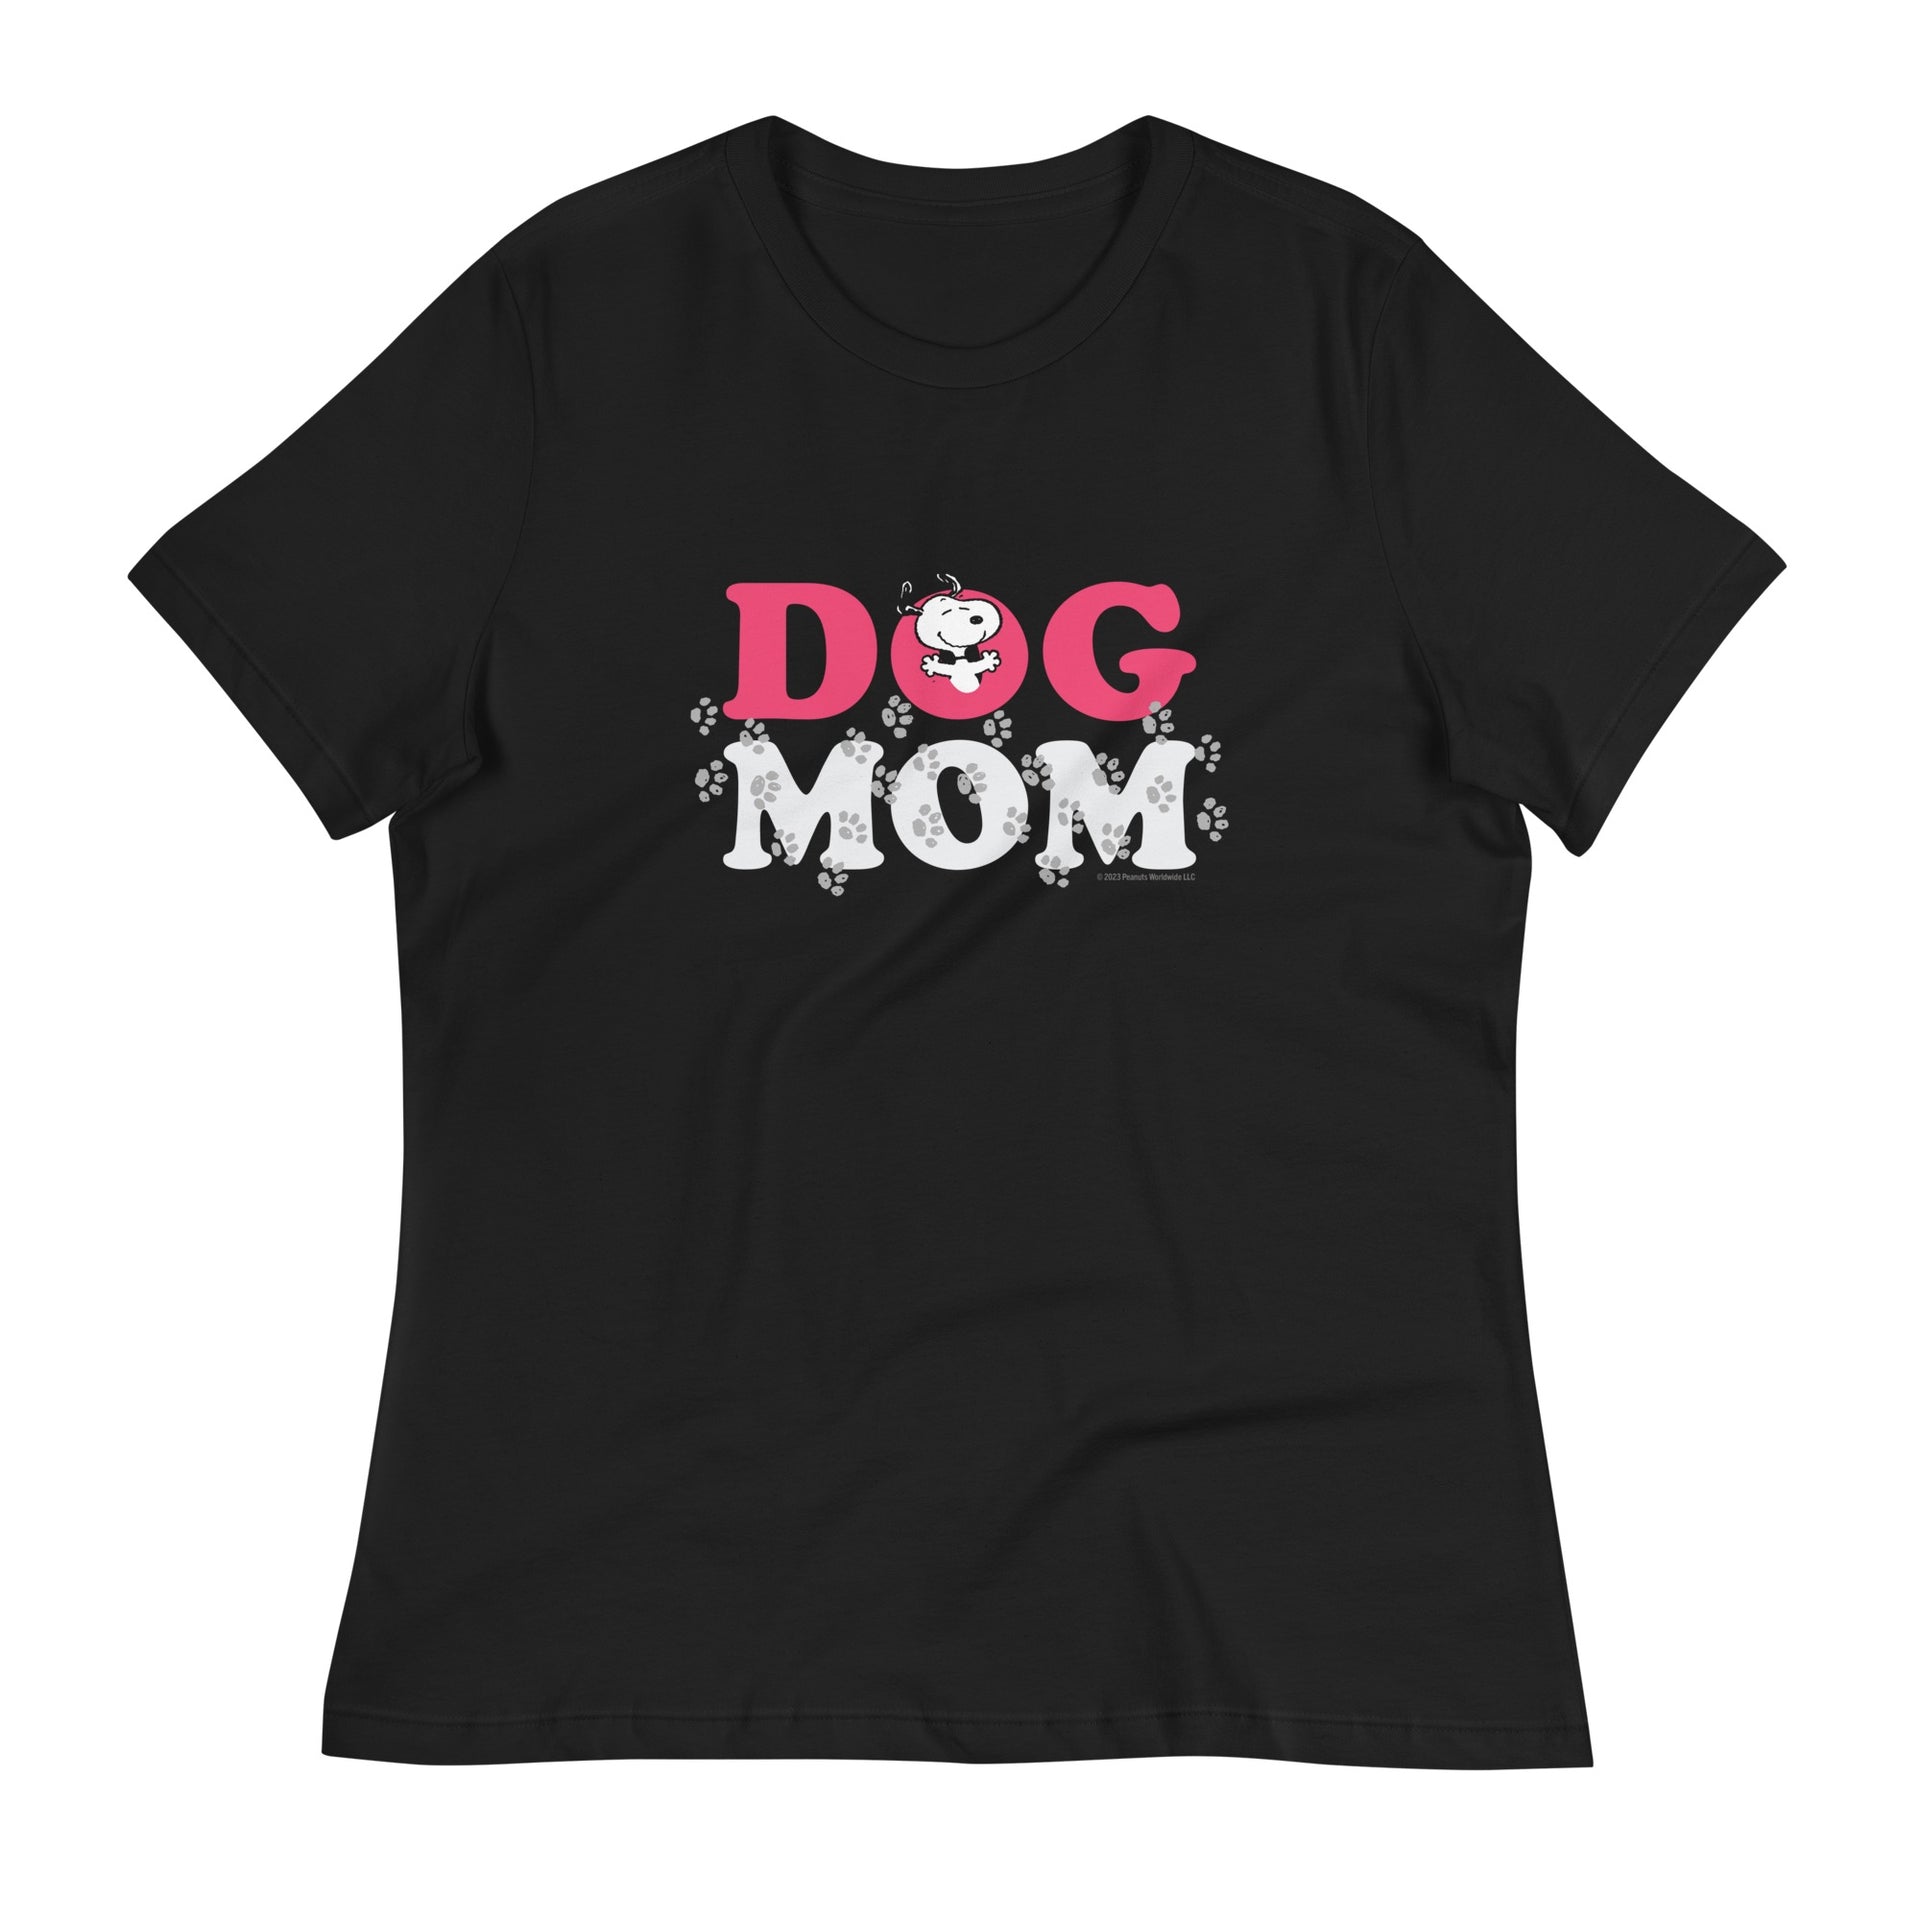 Snoopy Dog Mom Women's Relaxed T-Shirt